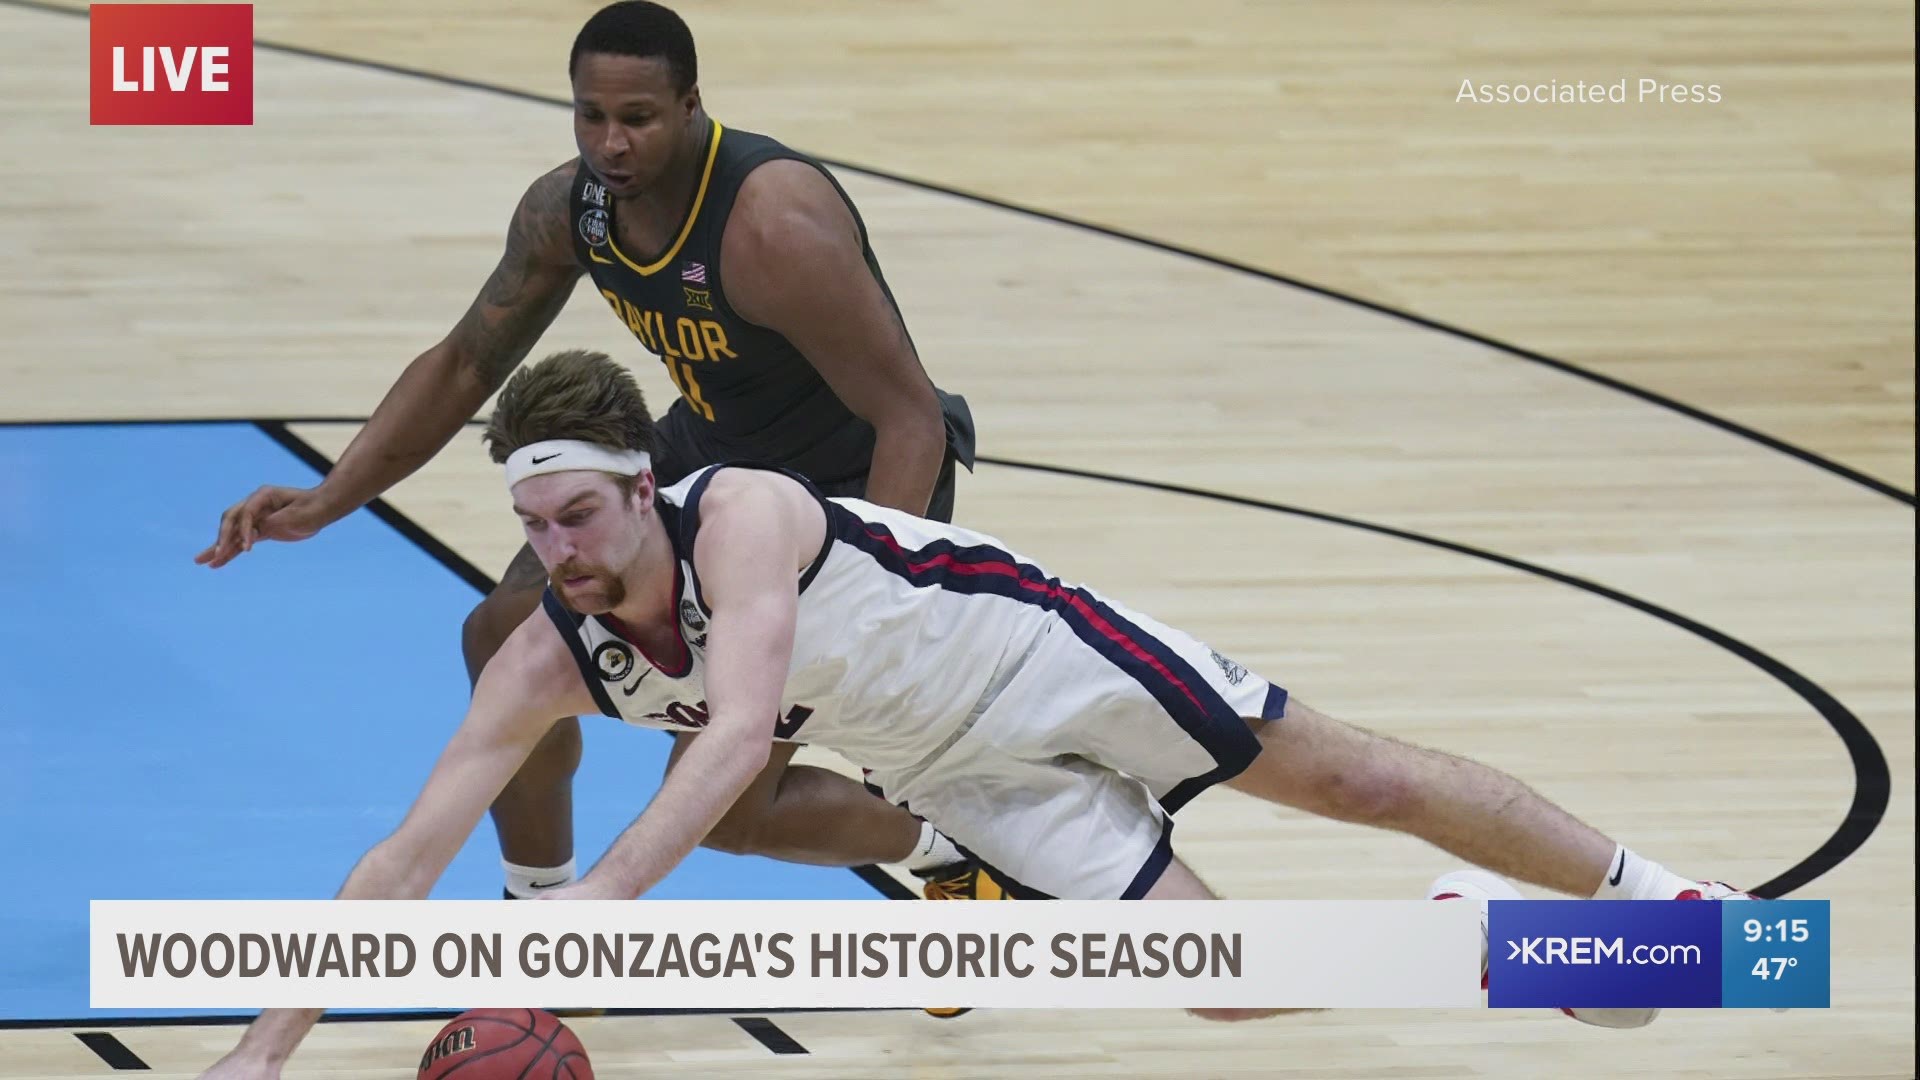 Mayor Nadine Woodward congratulated the Zags on a historic season that saw them come a game short of a perfect season, losing to Baylor in the national title game.